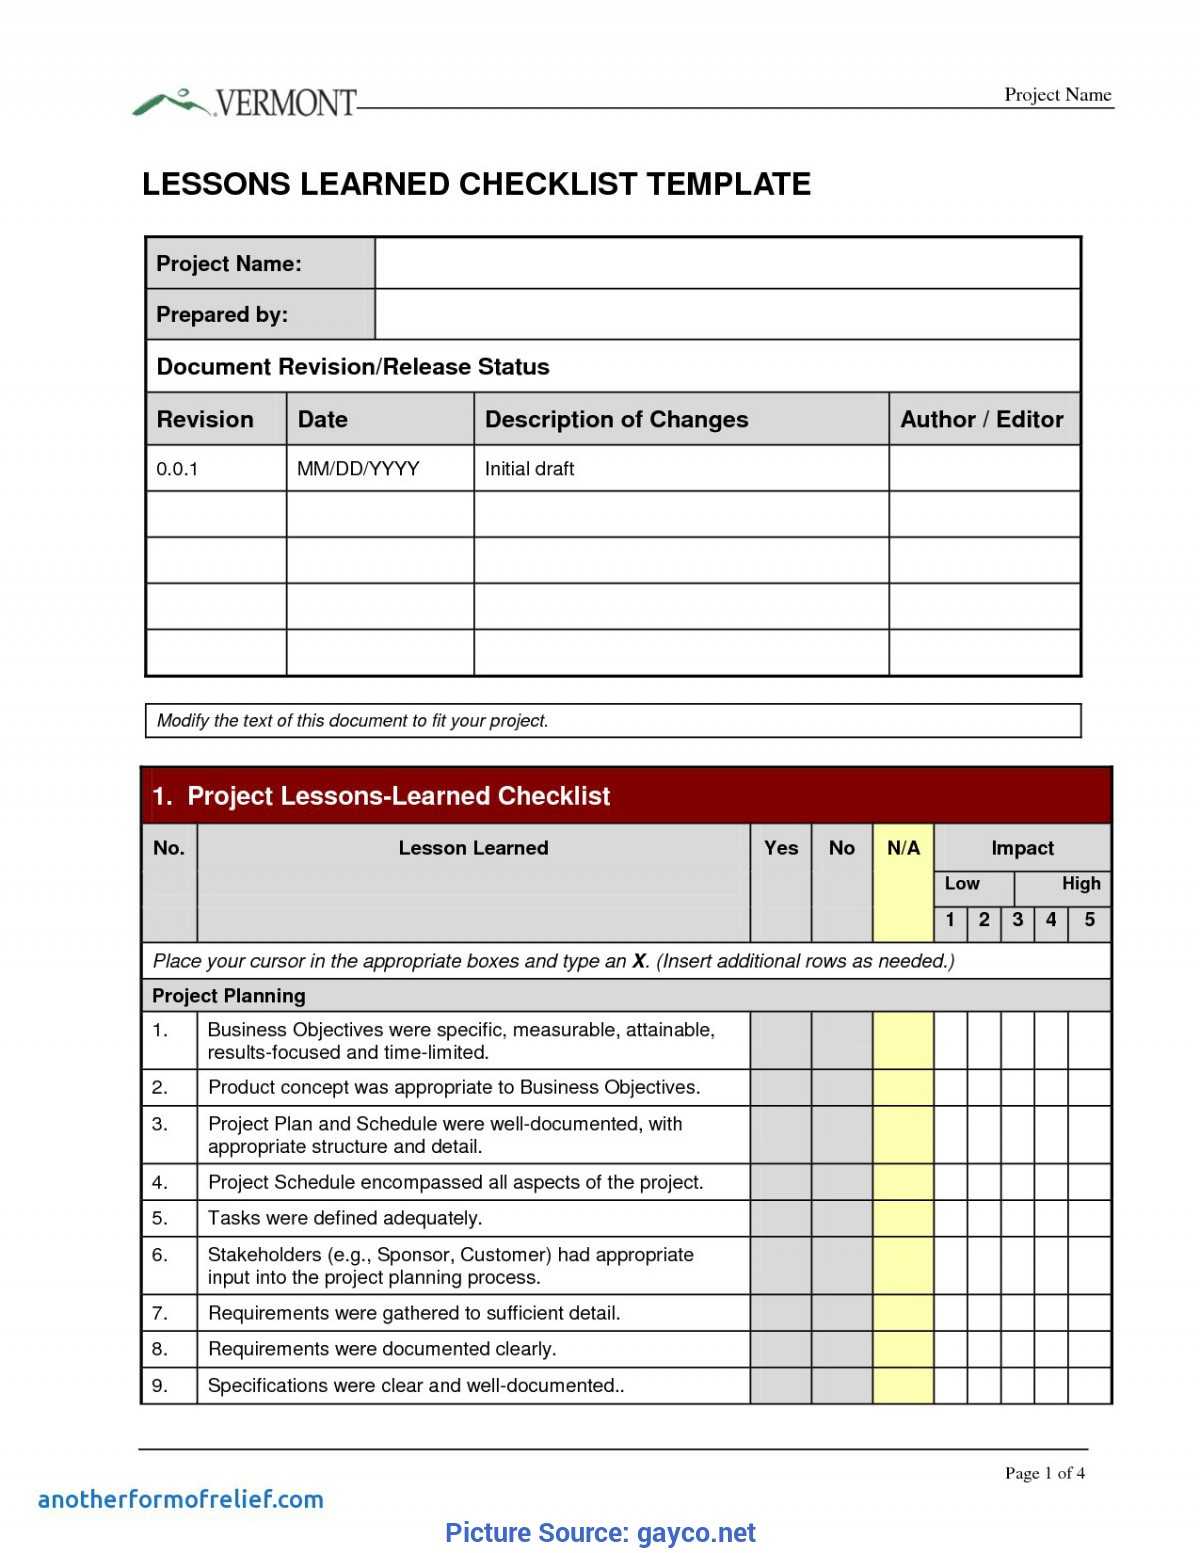 Great Lessons Learnt Template Checklist Prince2 Lessons With Lessons Learnt Report Template